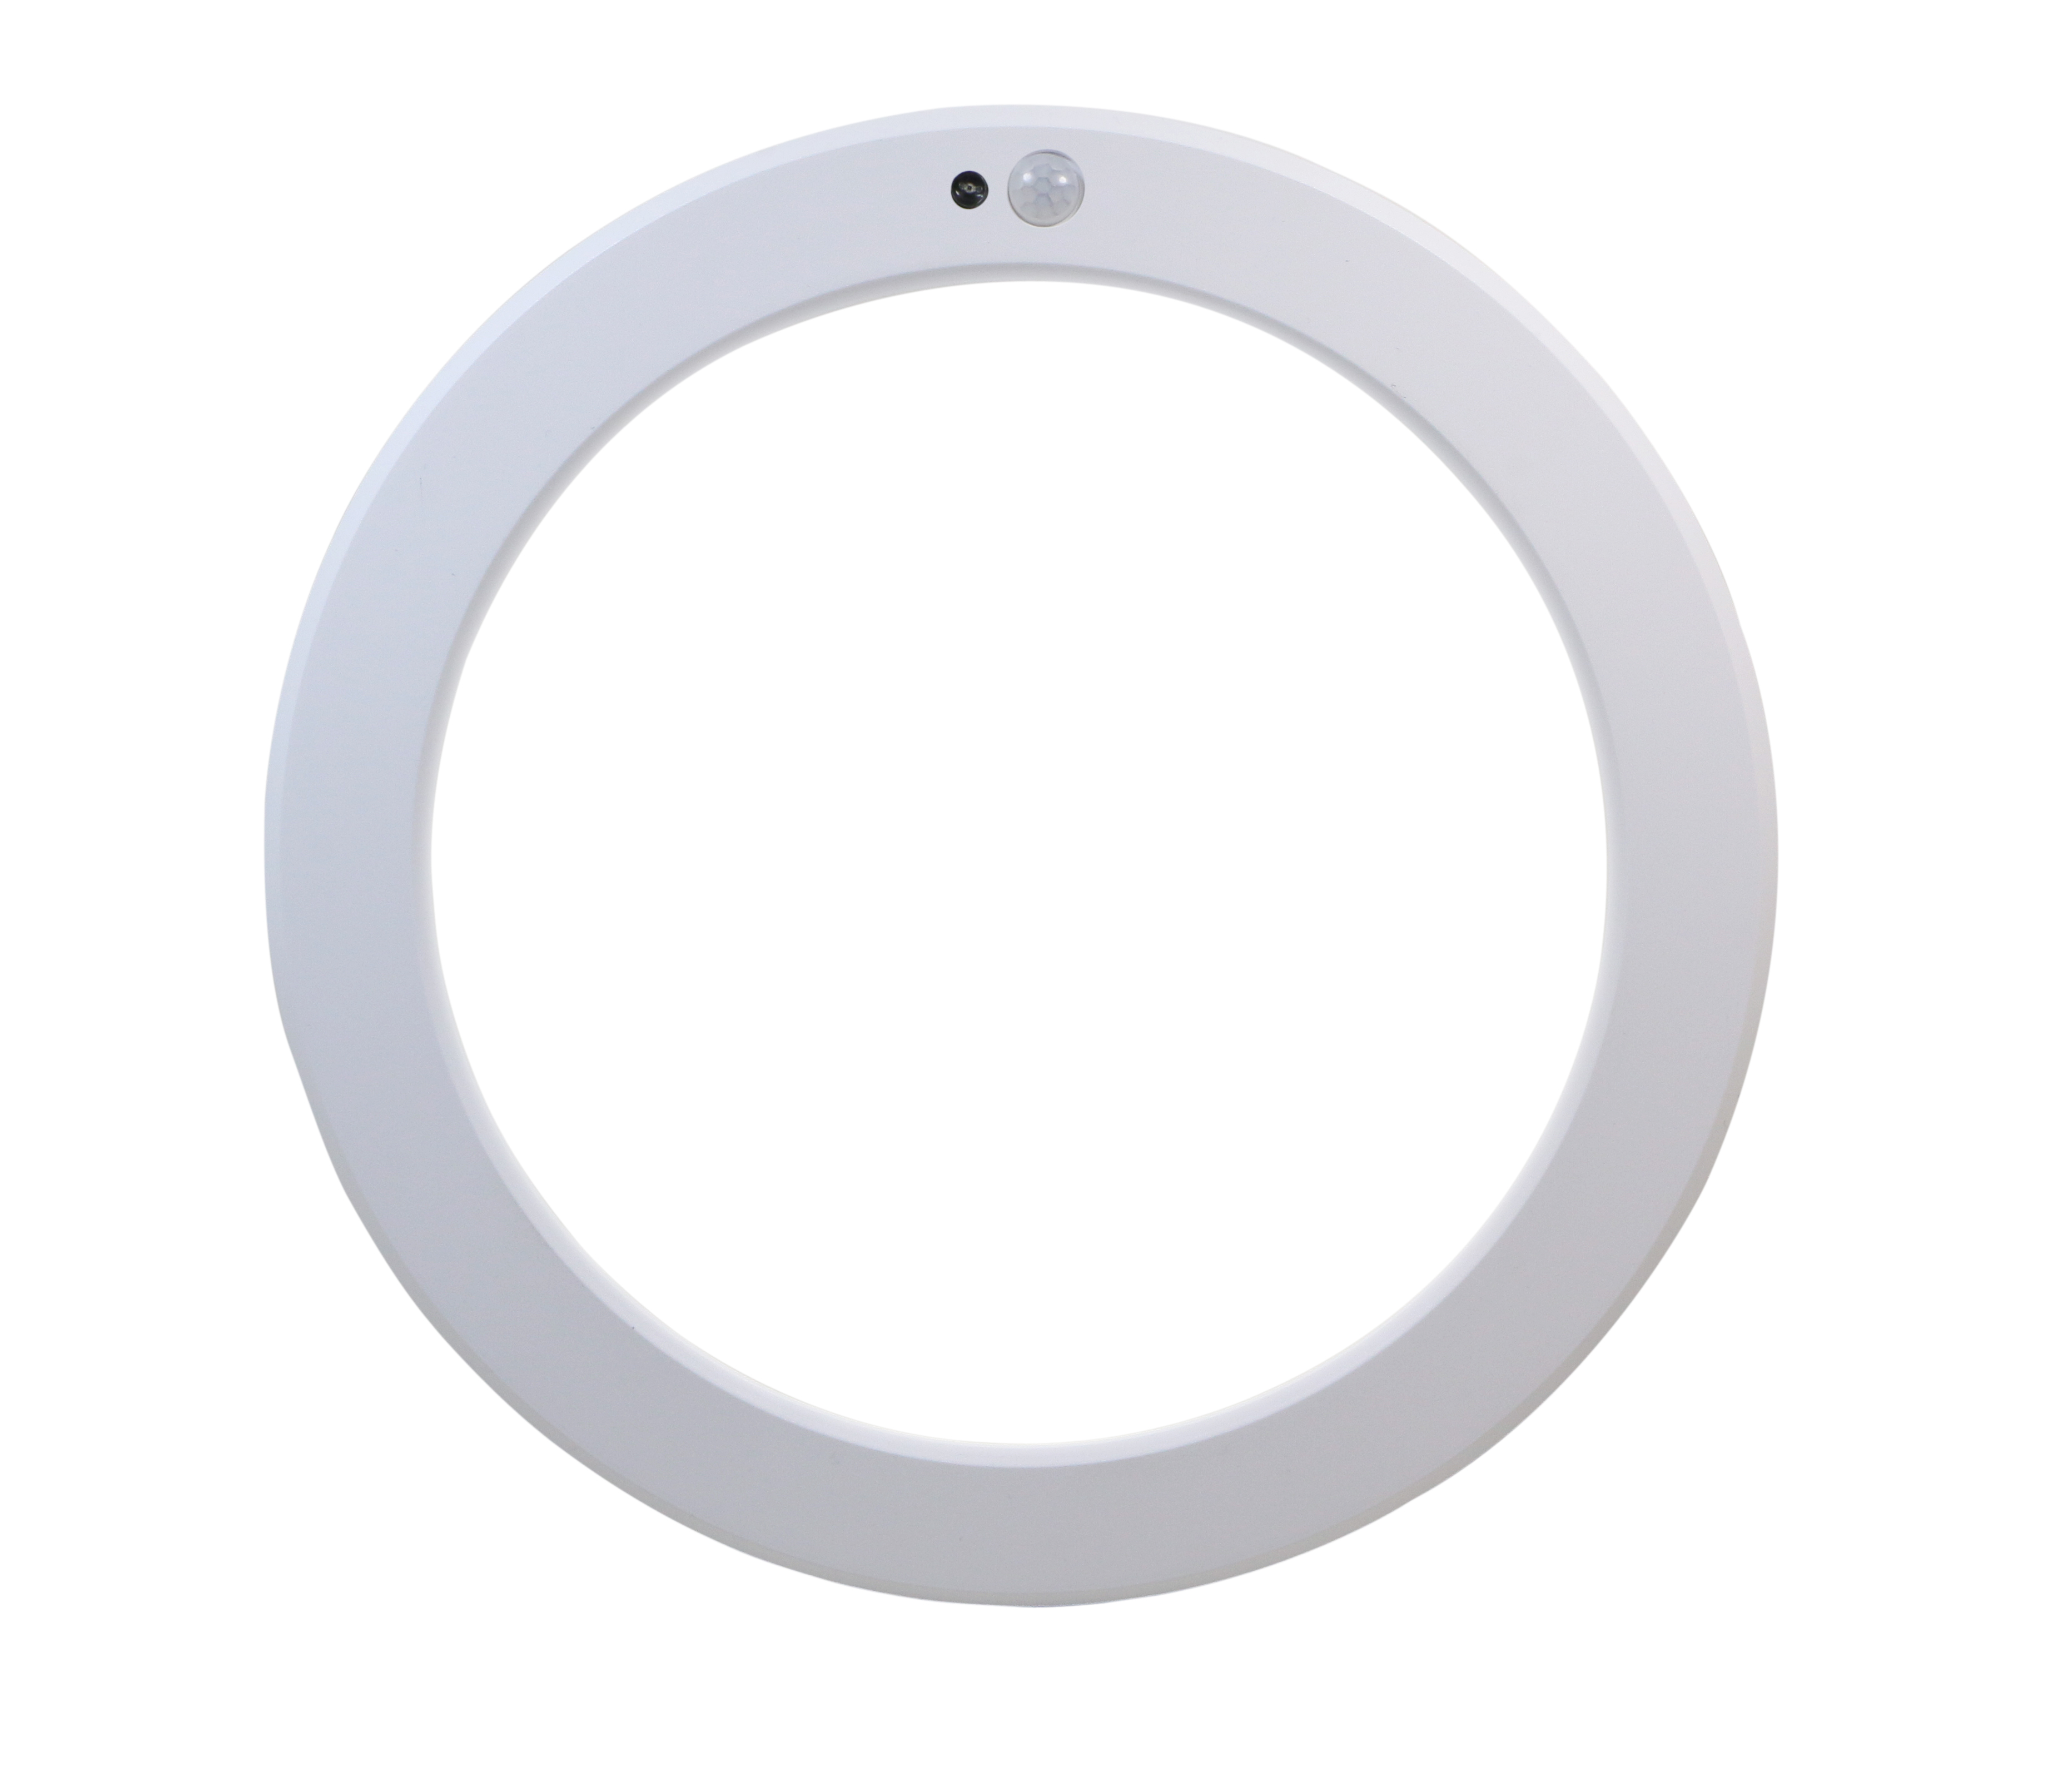 Meldon Adjustable Downlight 220mm 18W Dimmable 3CCT White